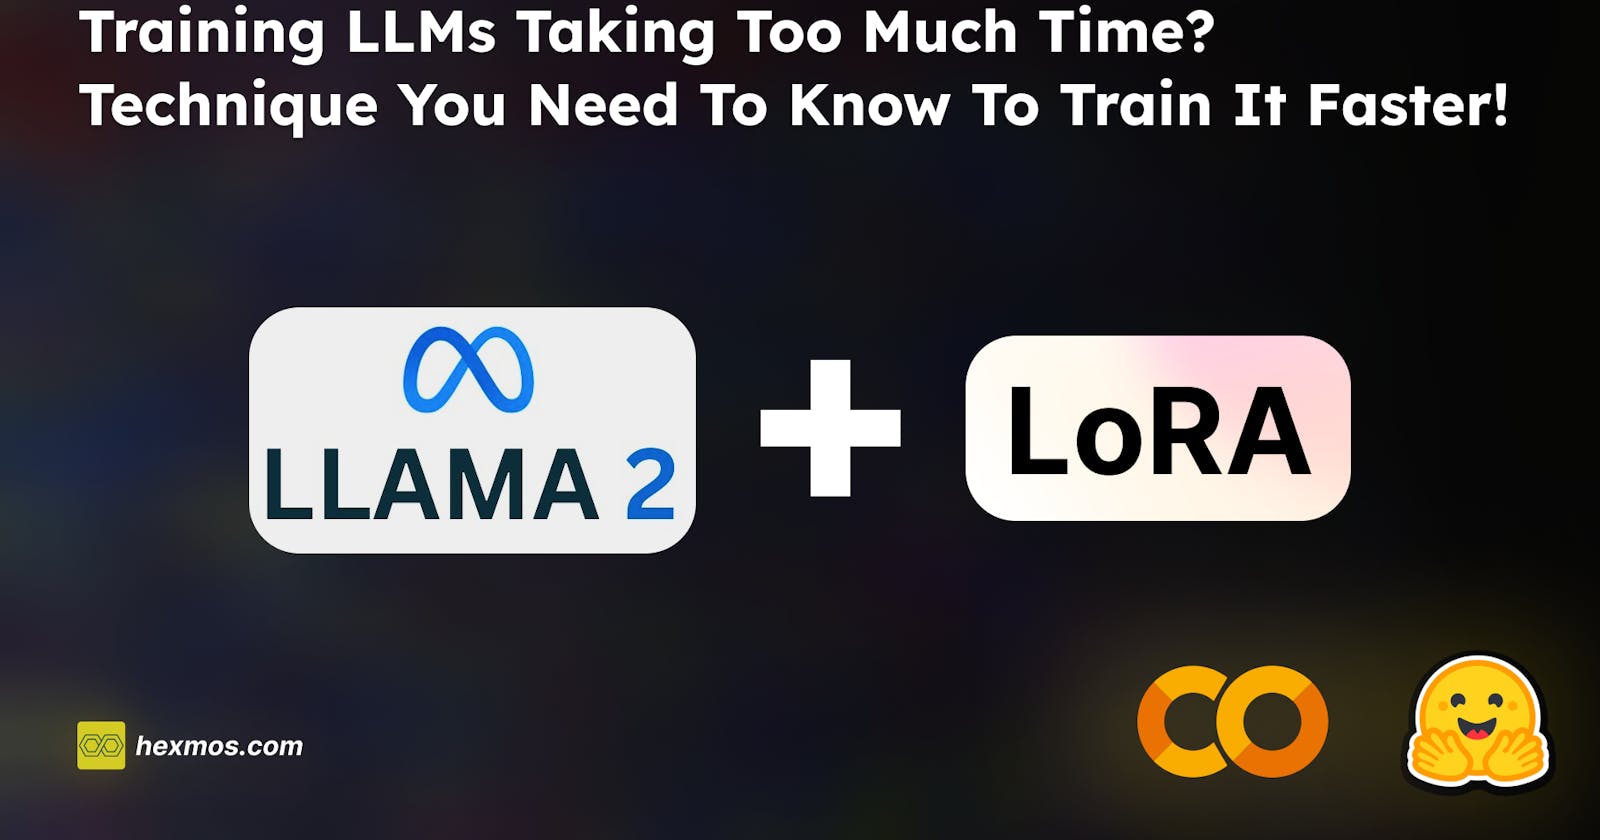 Training LLMs Taking Too Much Time? Technique you need to know to train it faster!